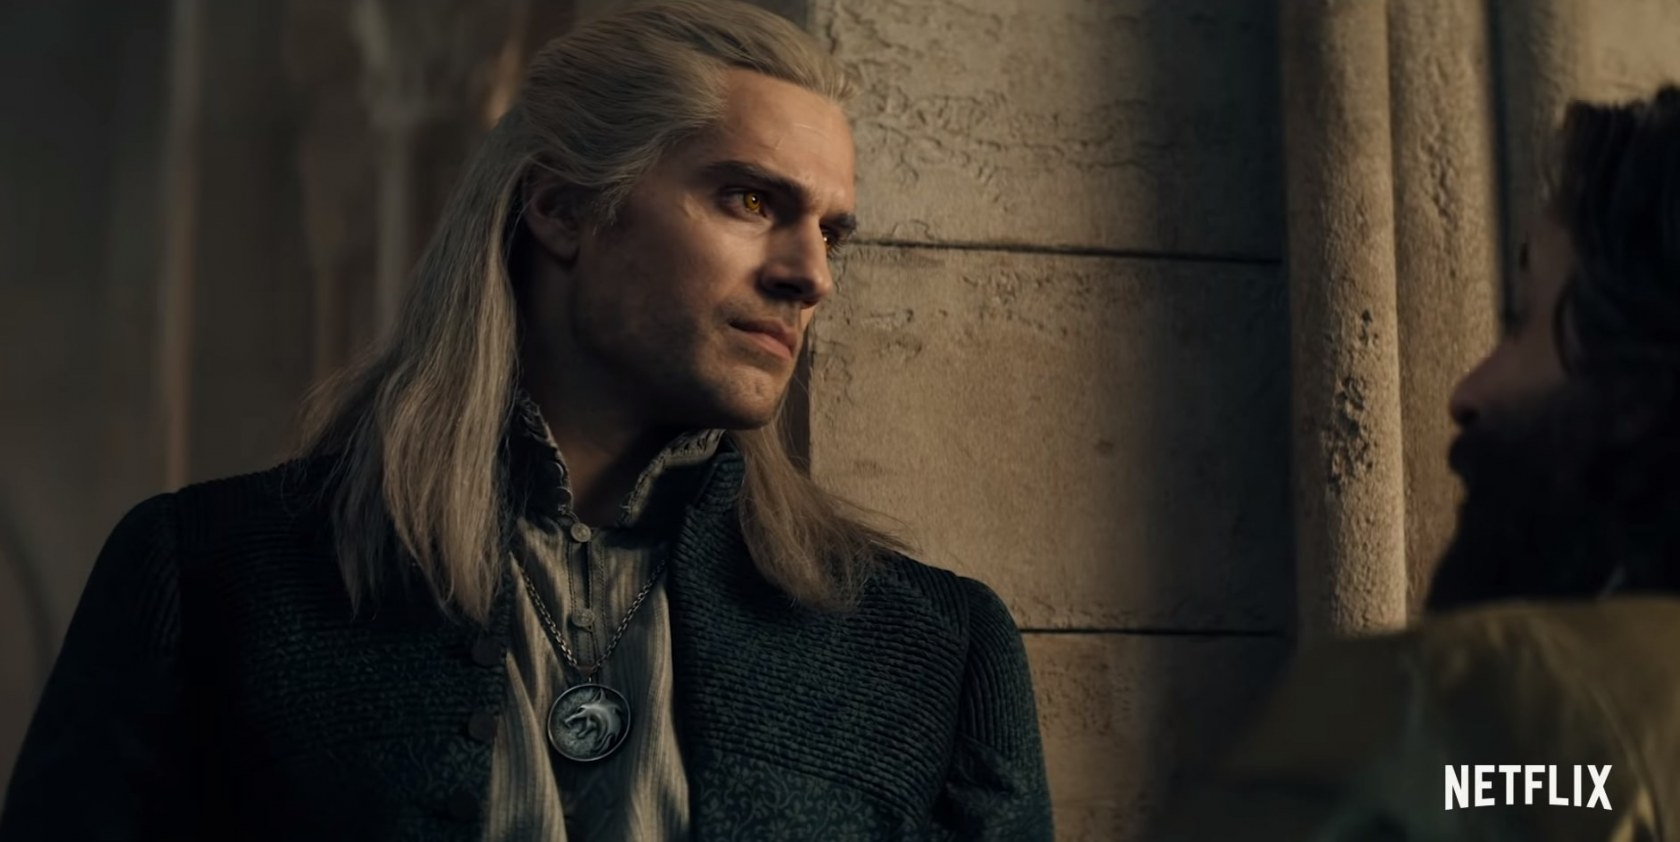 The Witcher is set to become Netflix's biggest debut season ever